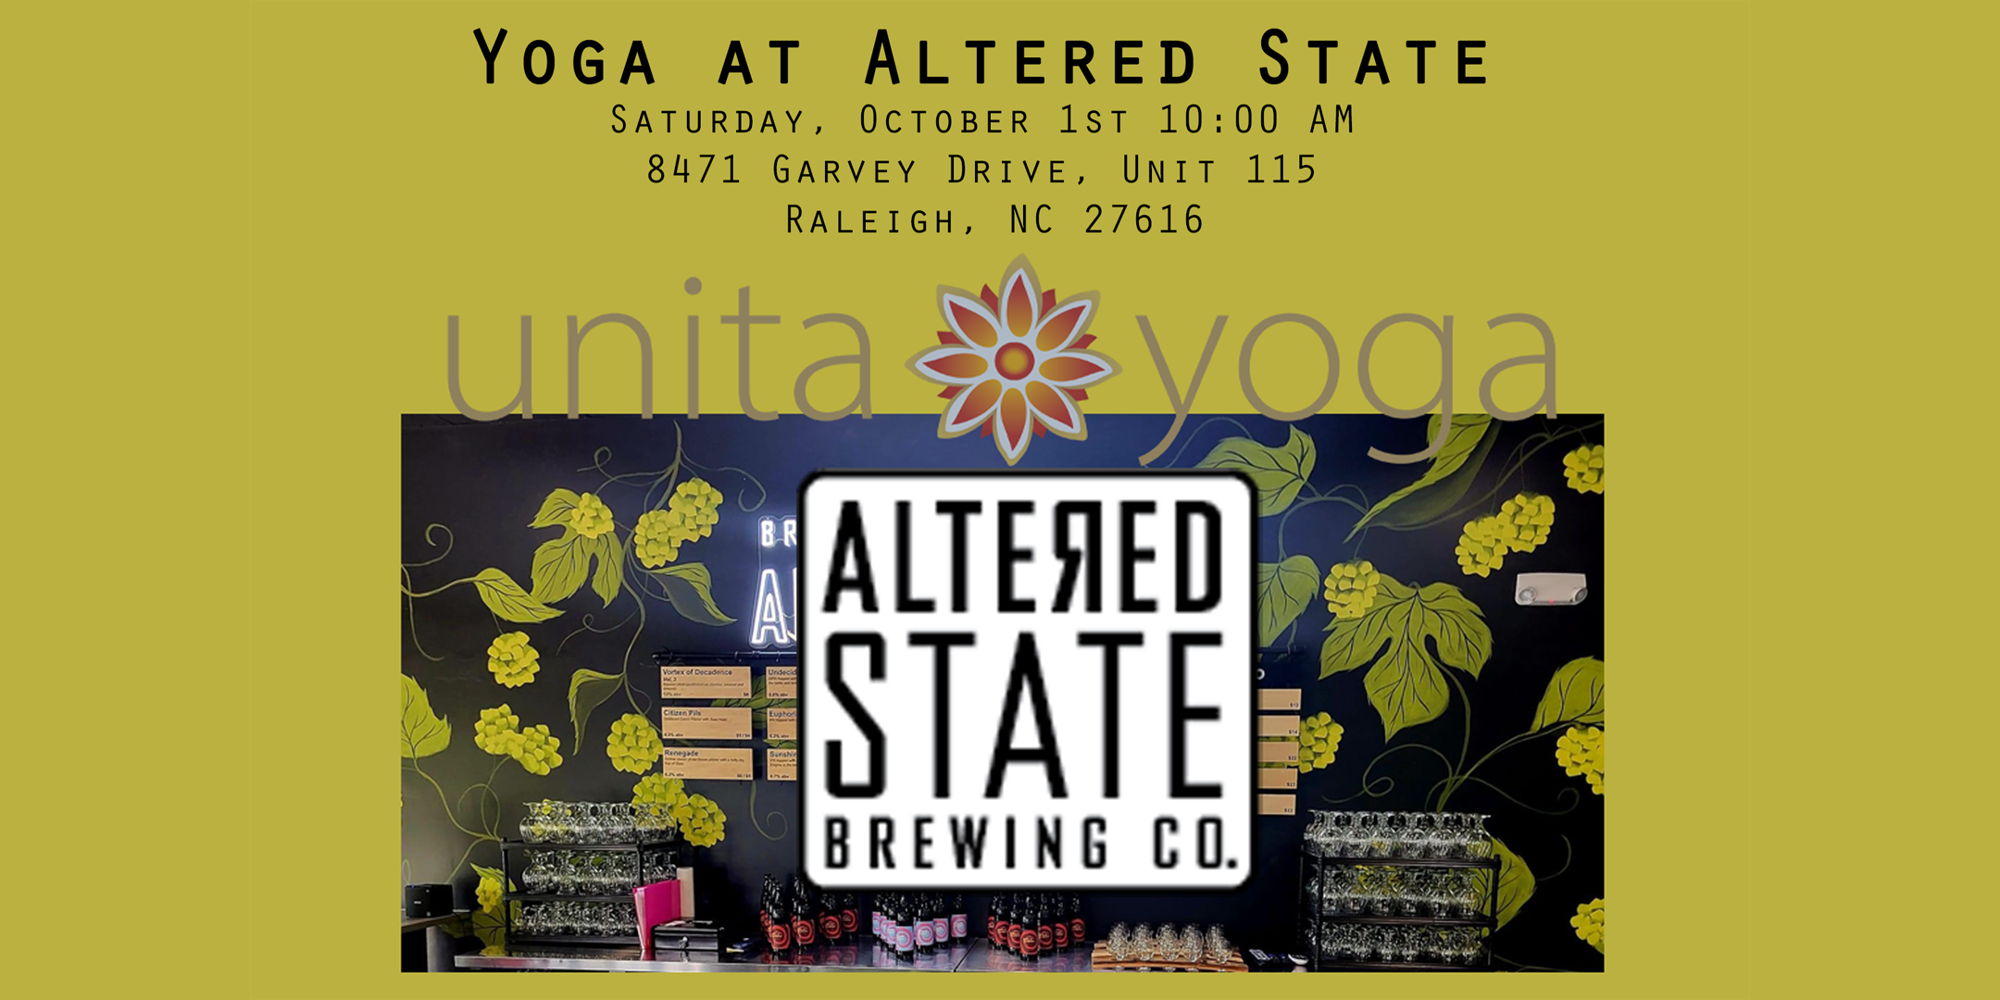 Yoga at Altered State promotional image